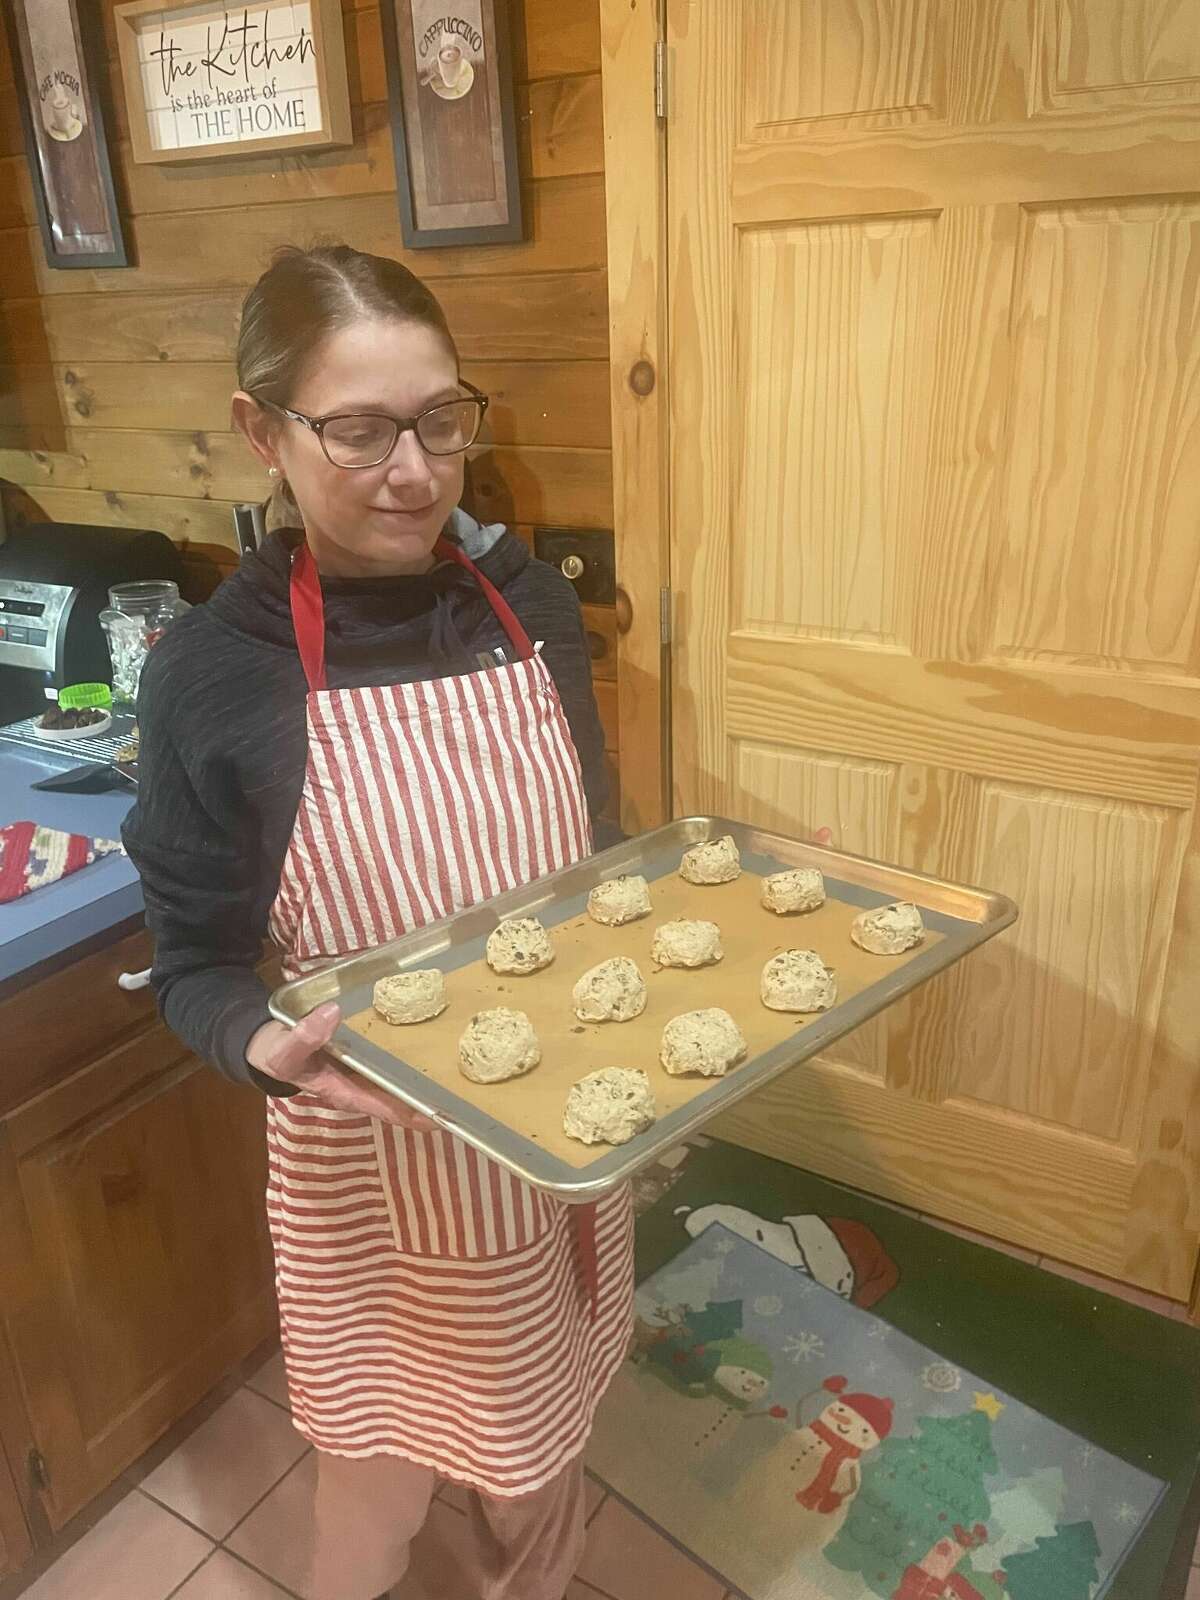 Last year, Steve Wojcik received a life-saving heart transplant after being diagnosed with acute heart failure. Now, he and his wife, Melissa, operate at an-home bakery focused on raising awareness for organ donations. 